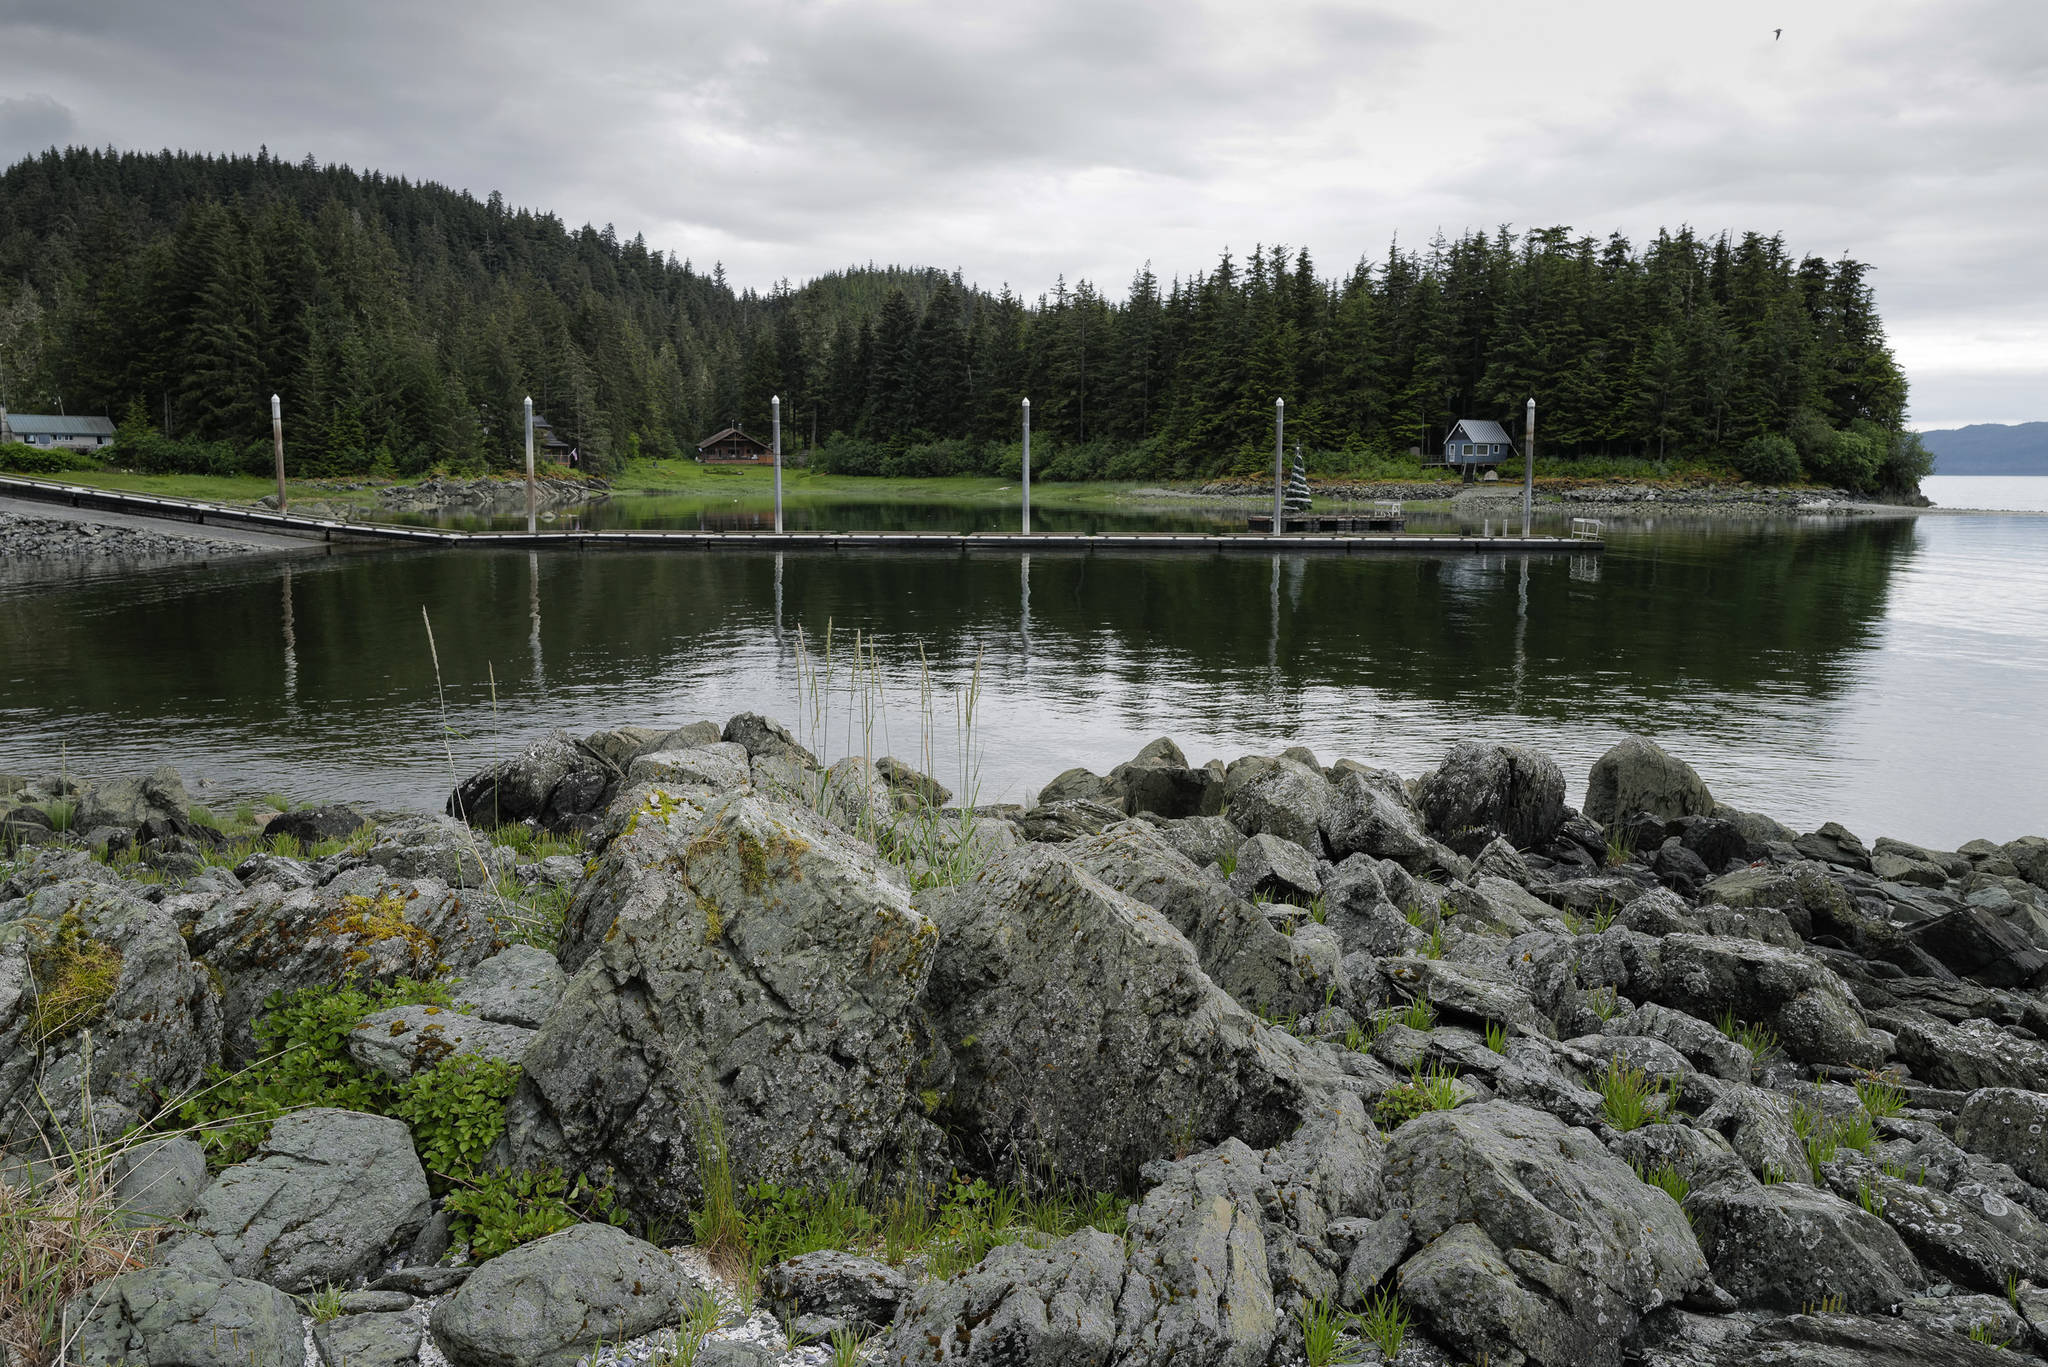 The city-owned boat launch at Amalga Harbor on Wednesday, June 19, 2019. (Michael Penn | Juneau Empire)                                The city-owned boat launch at Amalga Harbor on Wednesday, June 19, 2019. (Michael Penn | Juneau Empire)